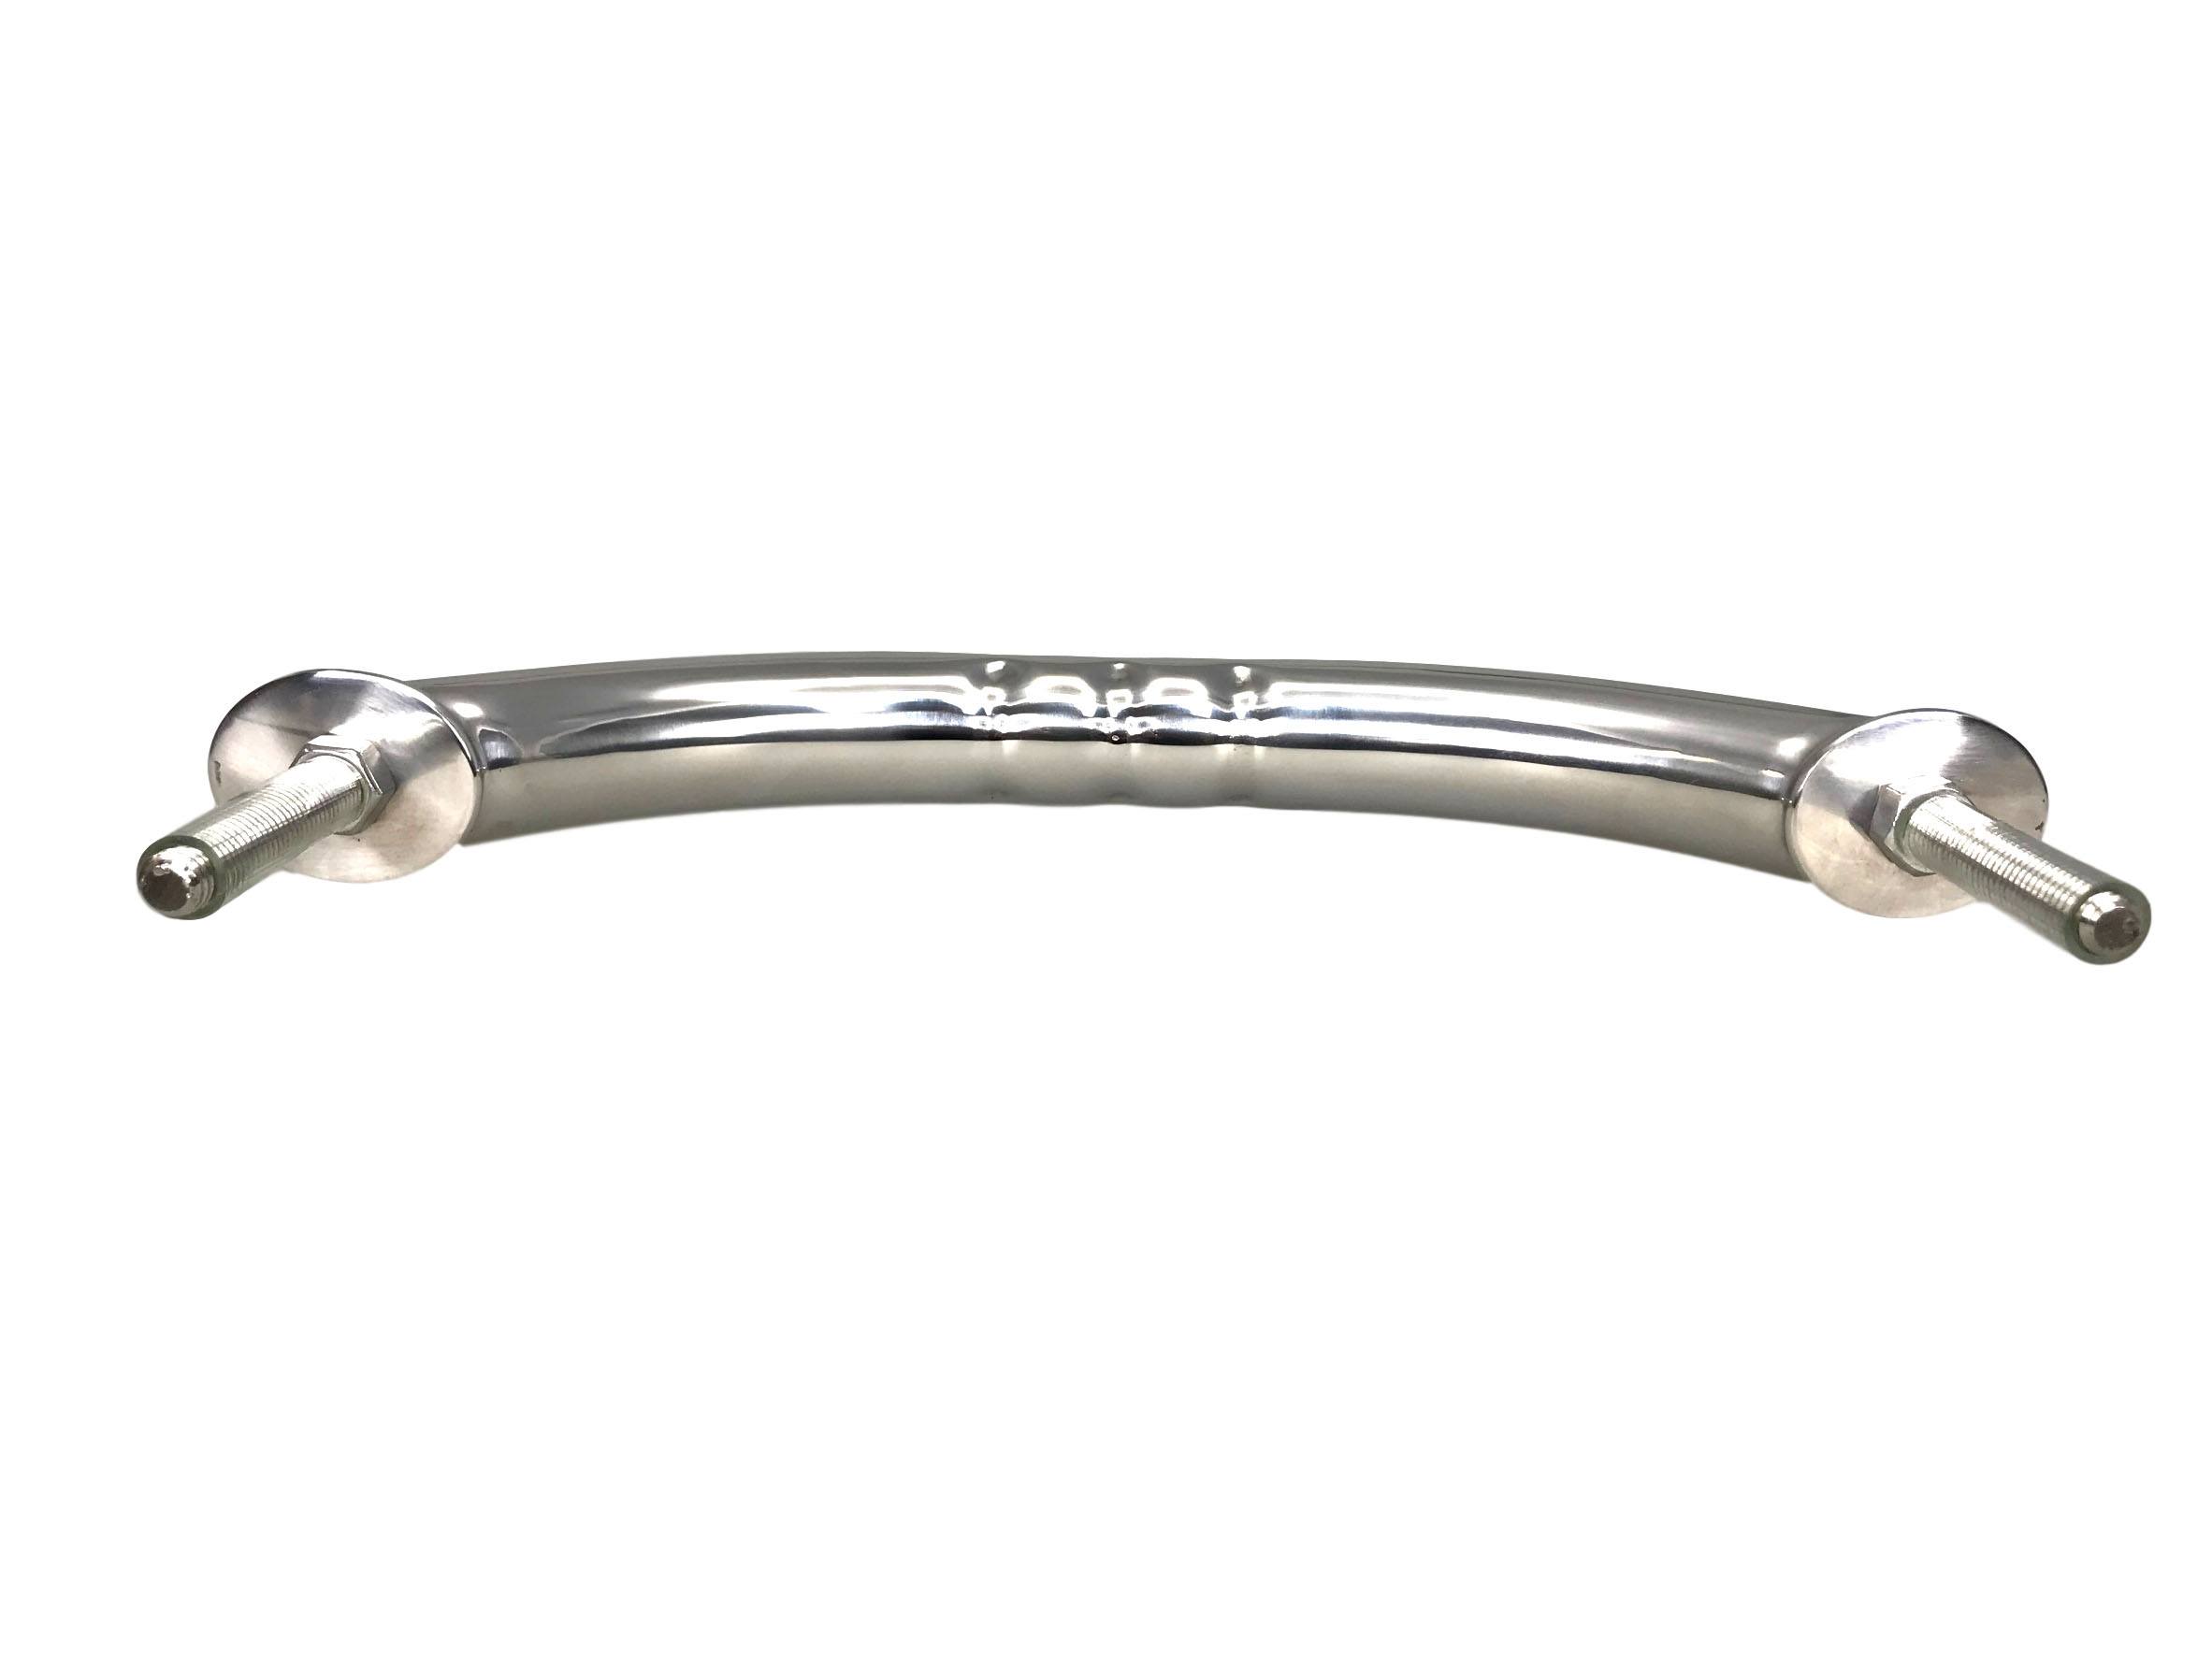 STAINLESS STEEL MARINE BOAT HANDRAIL 8-5/8 INCHES WITH WAVE CURVE